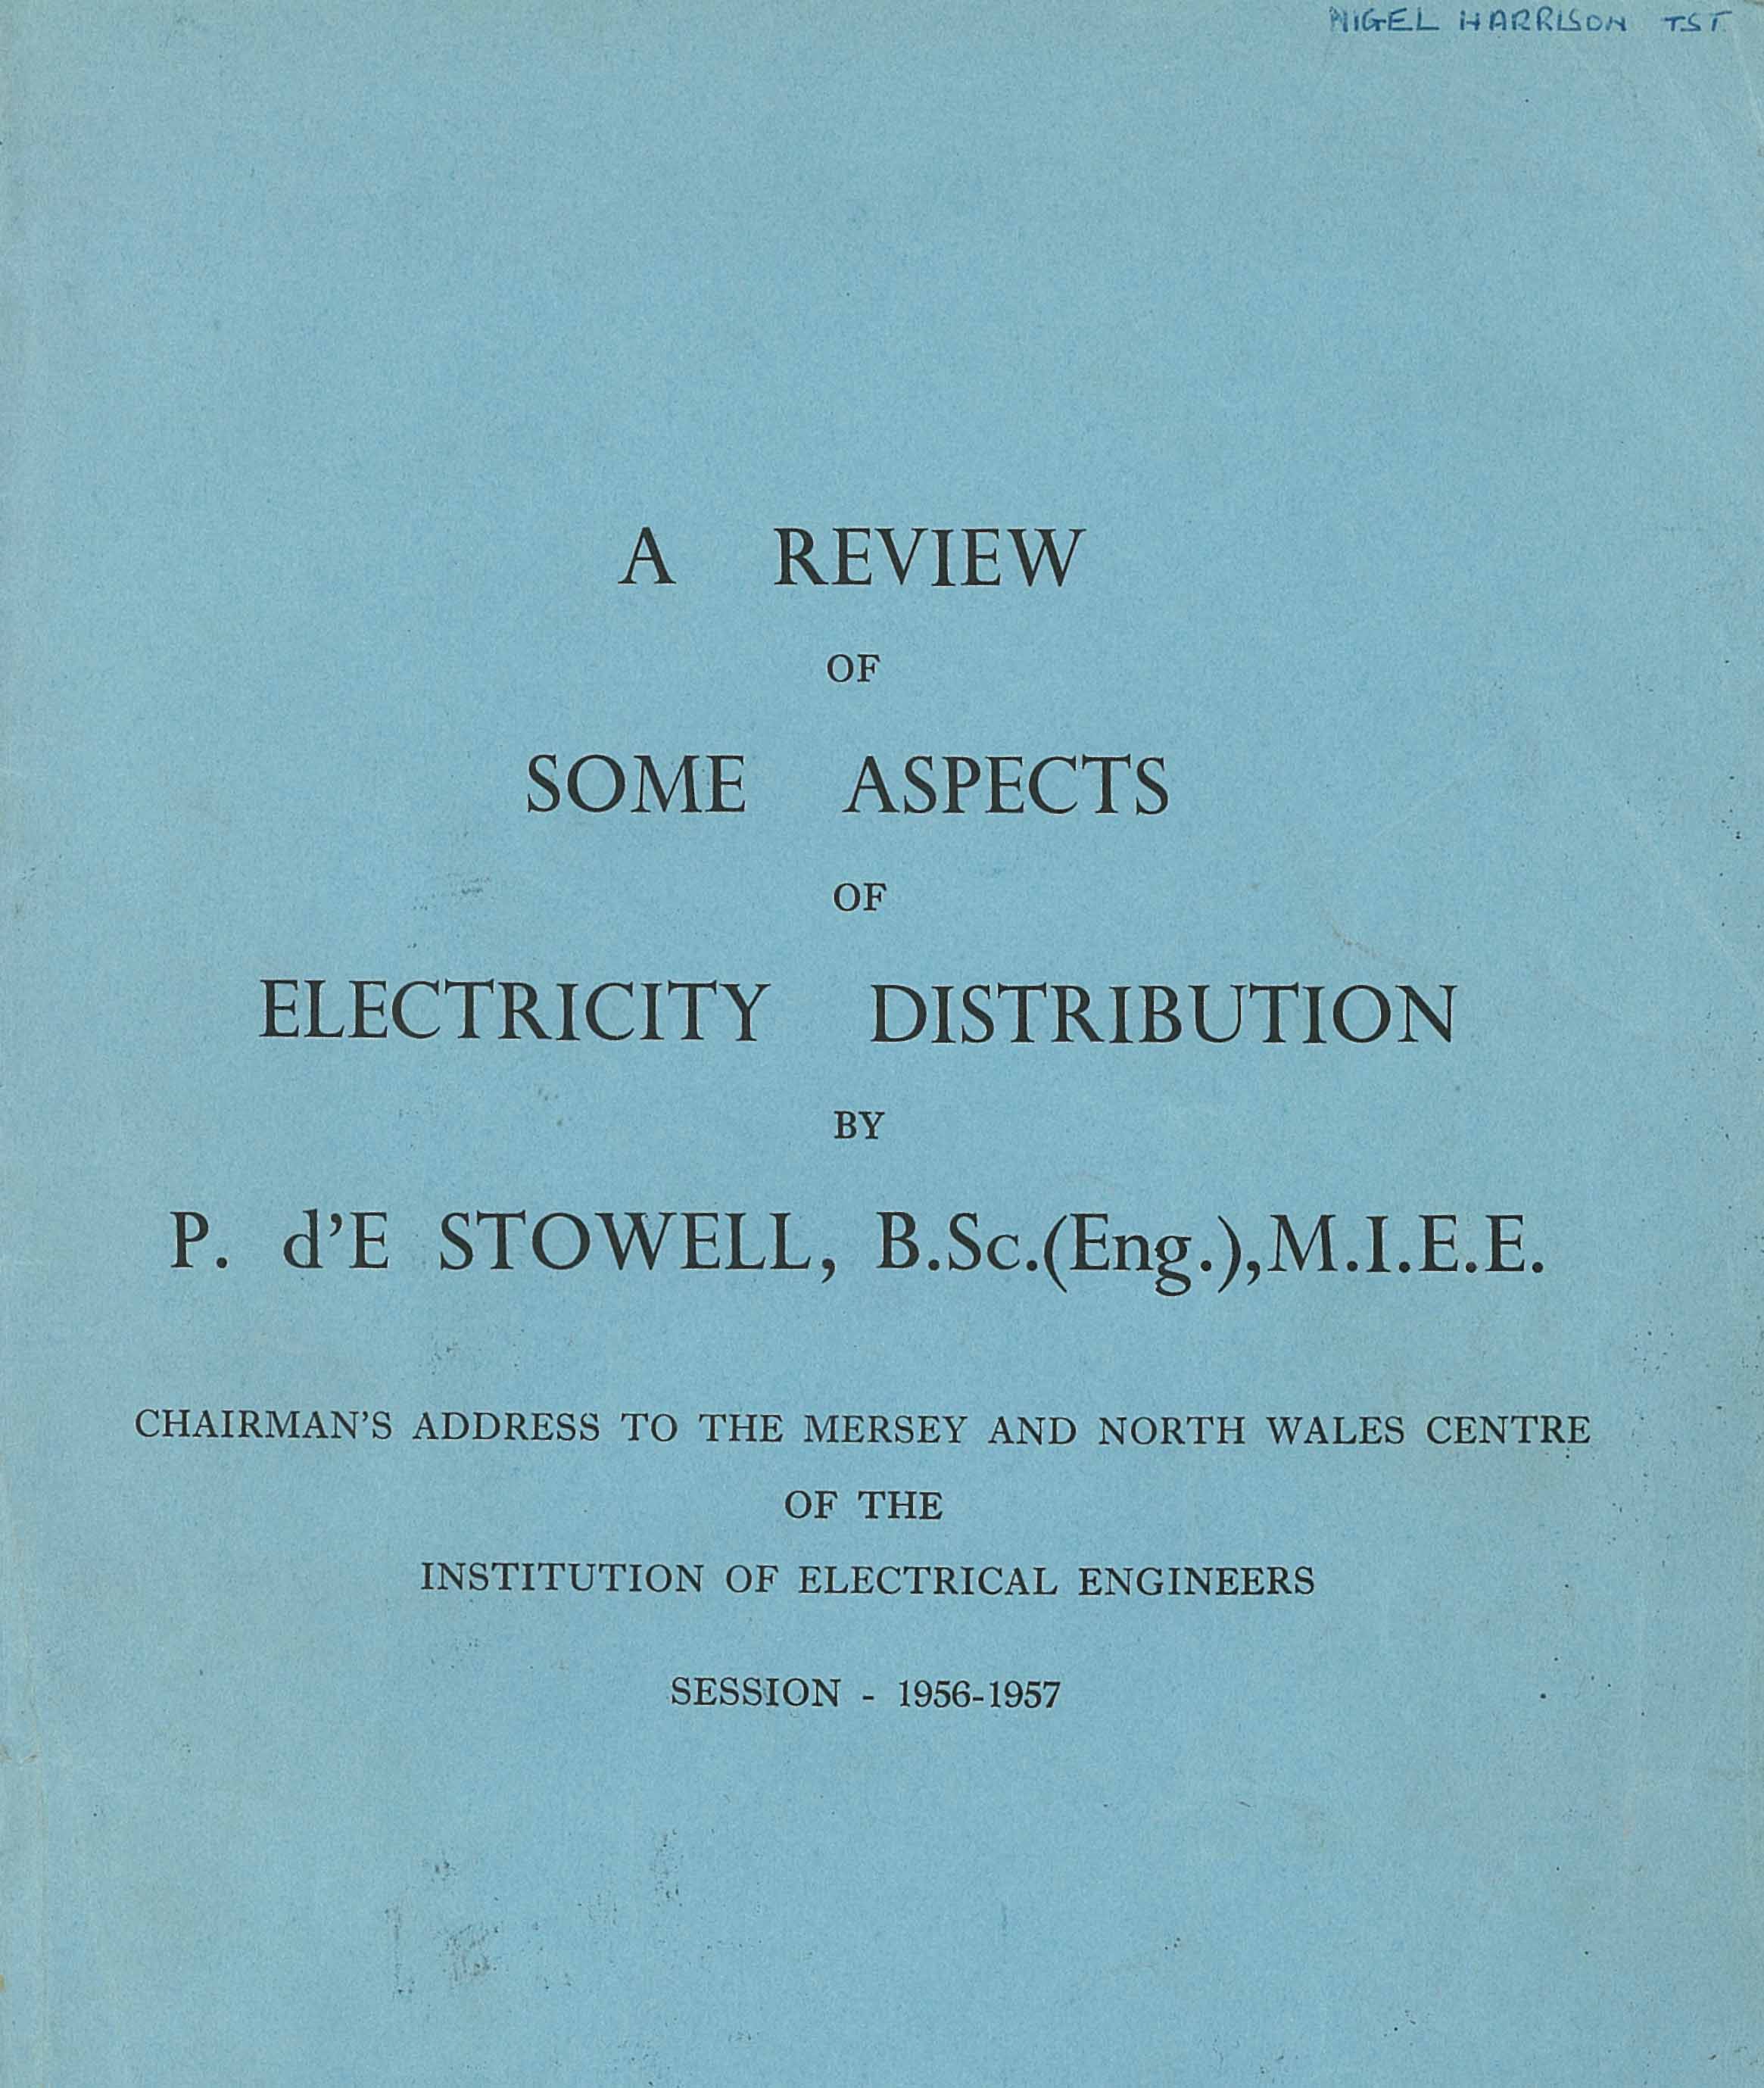 Early Electric Supply<br> by P dE Stowell 1955-56